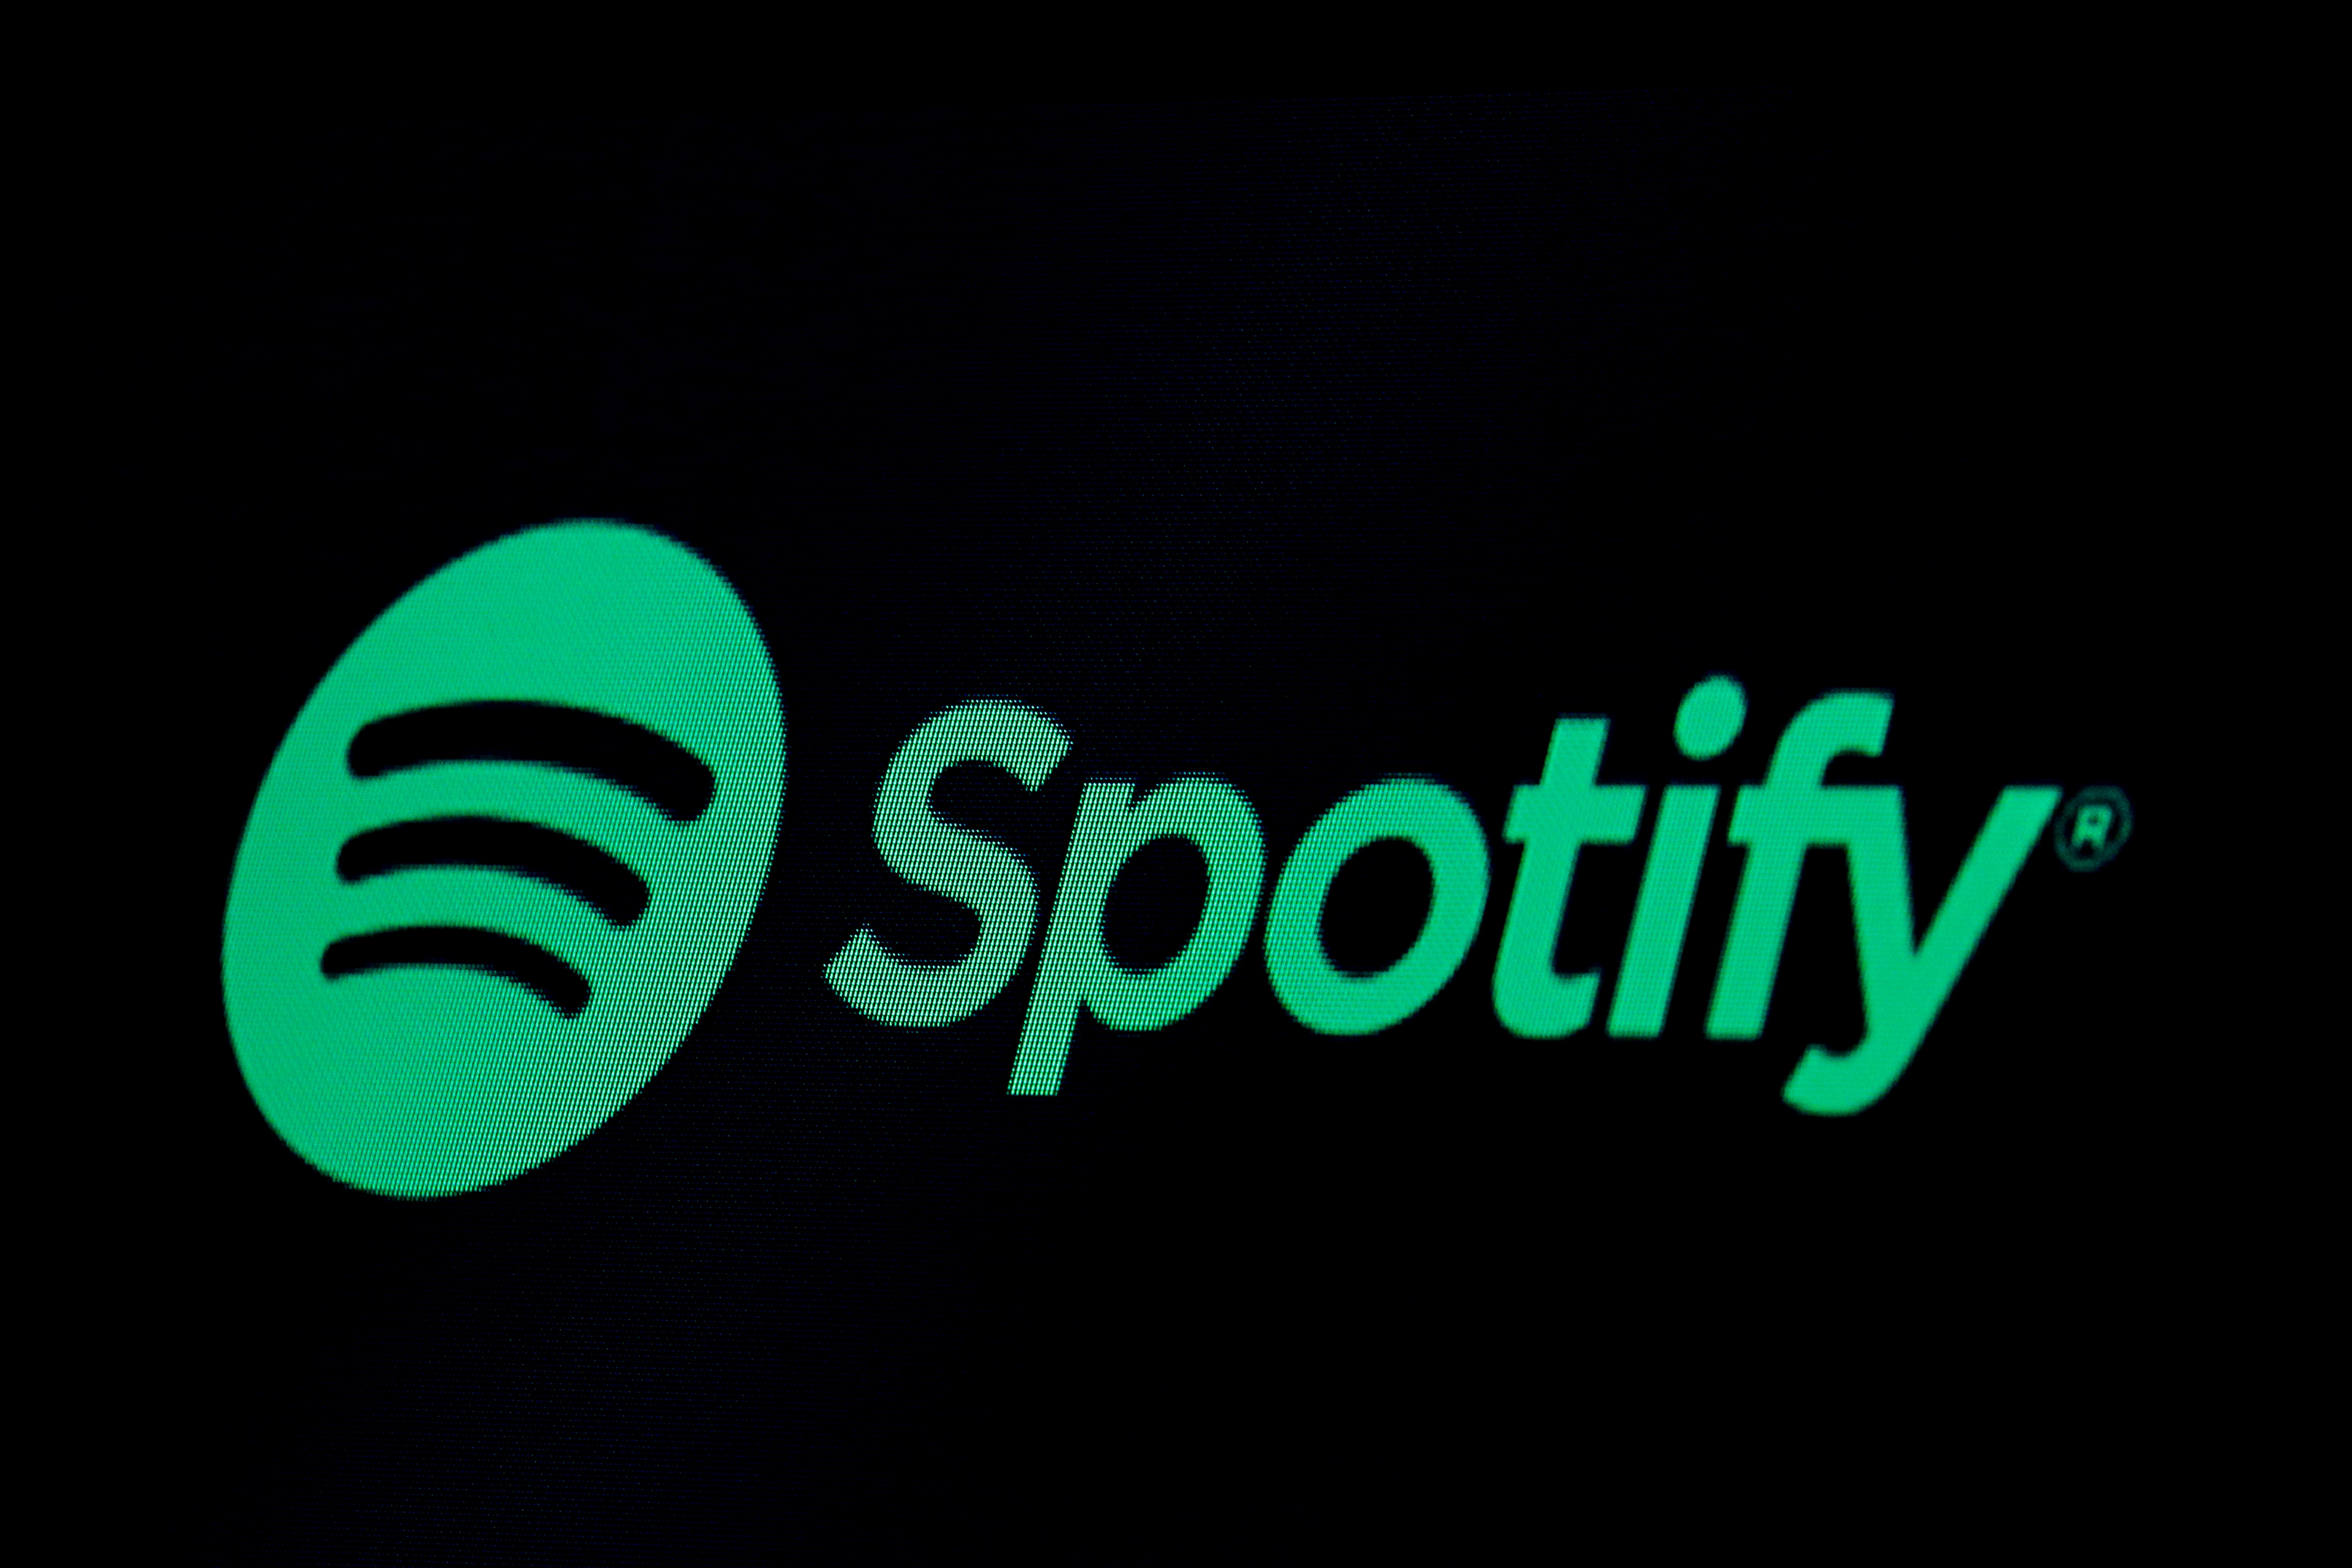 Spotify to use Google's AI to tailor podcasts, audiobooks recommendations